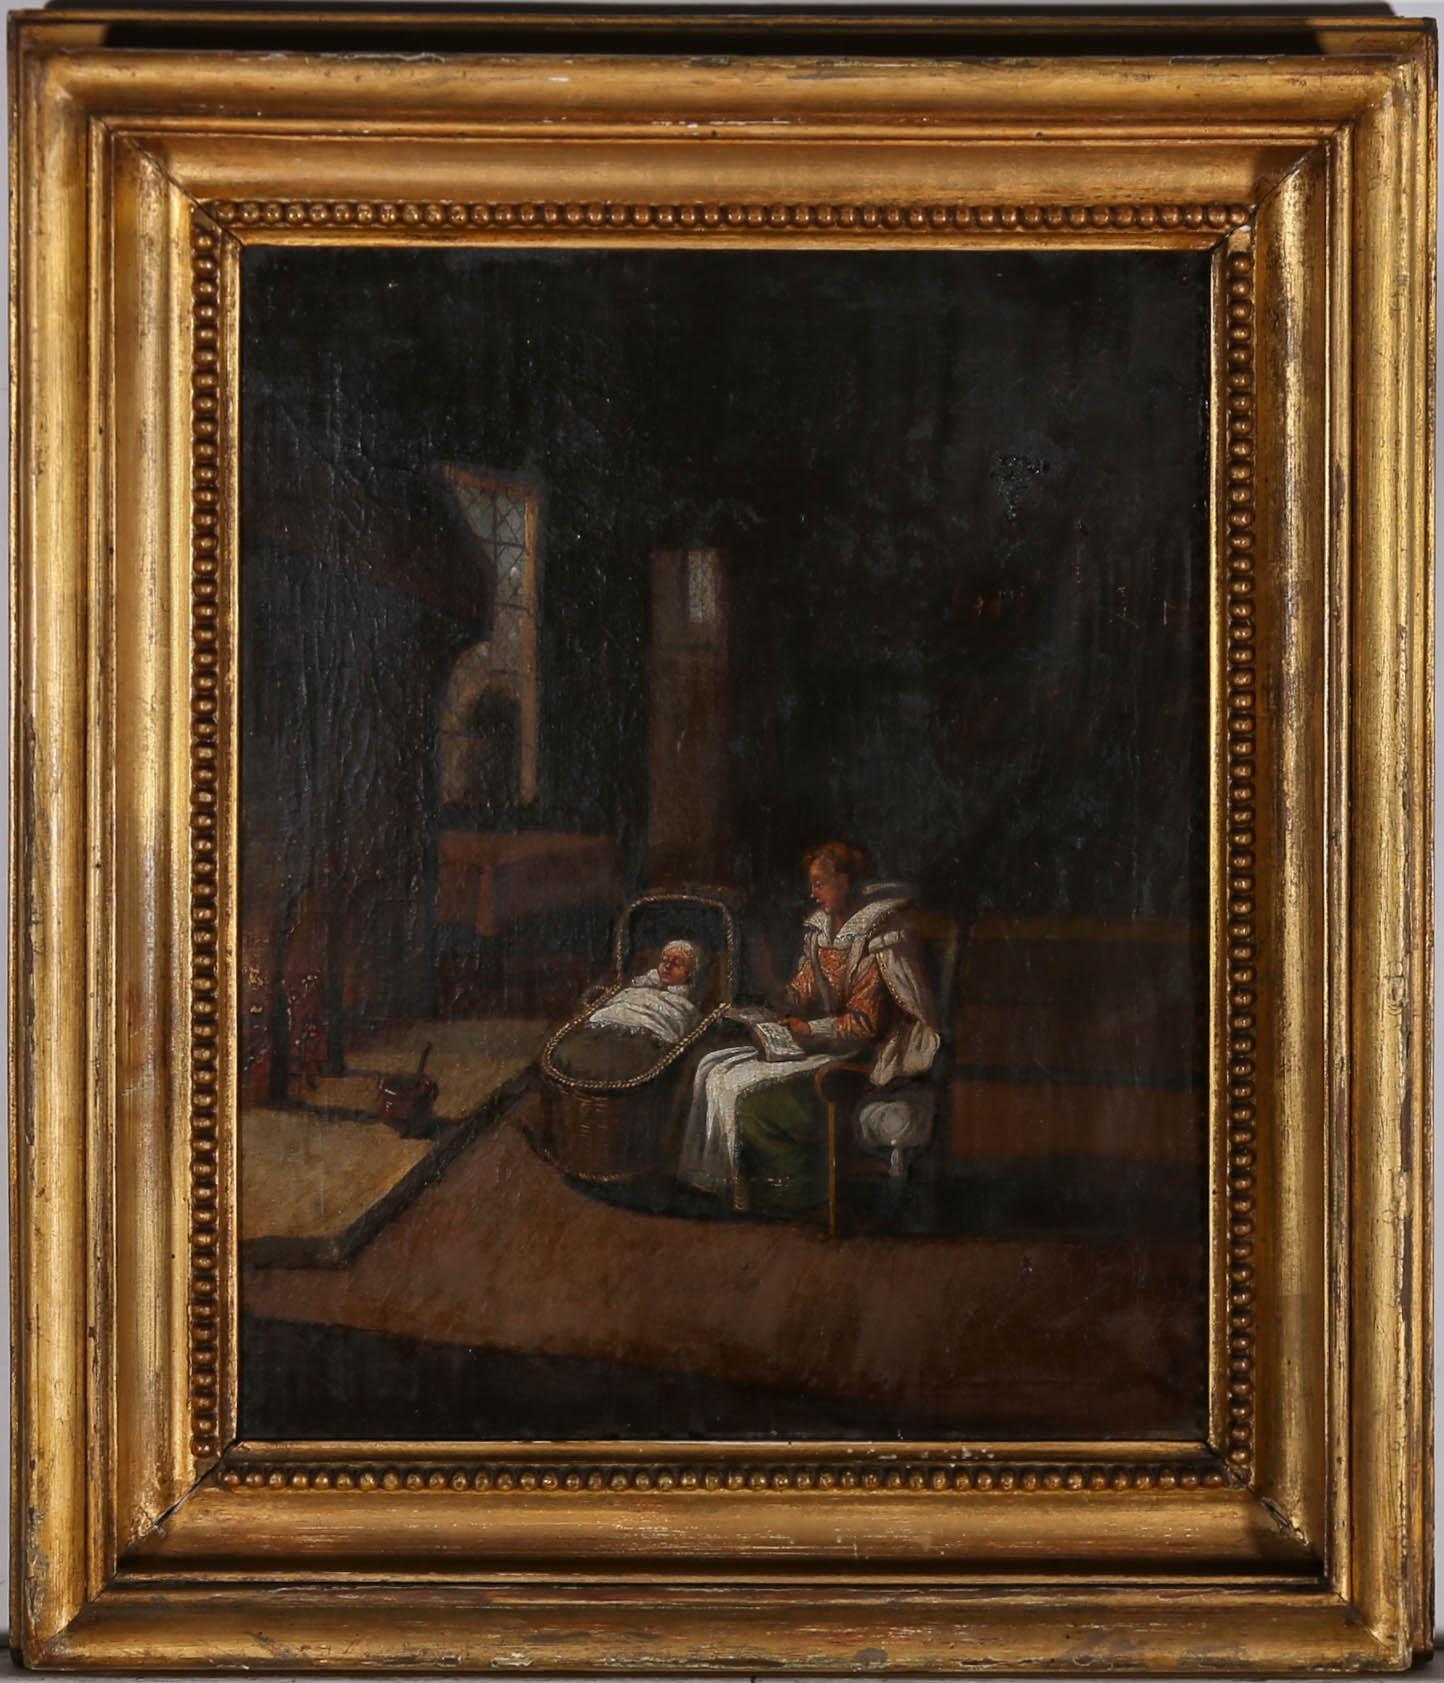 Unknown Figurative Painting - Mid 19th Century Oil - A Bedtime Story